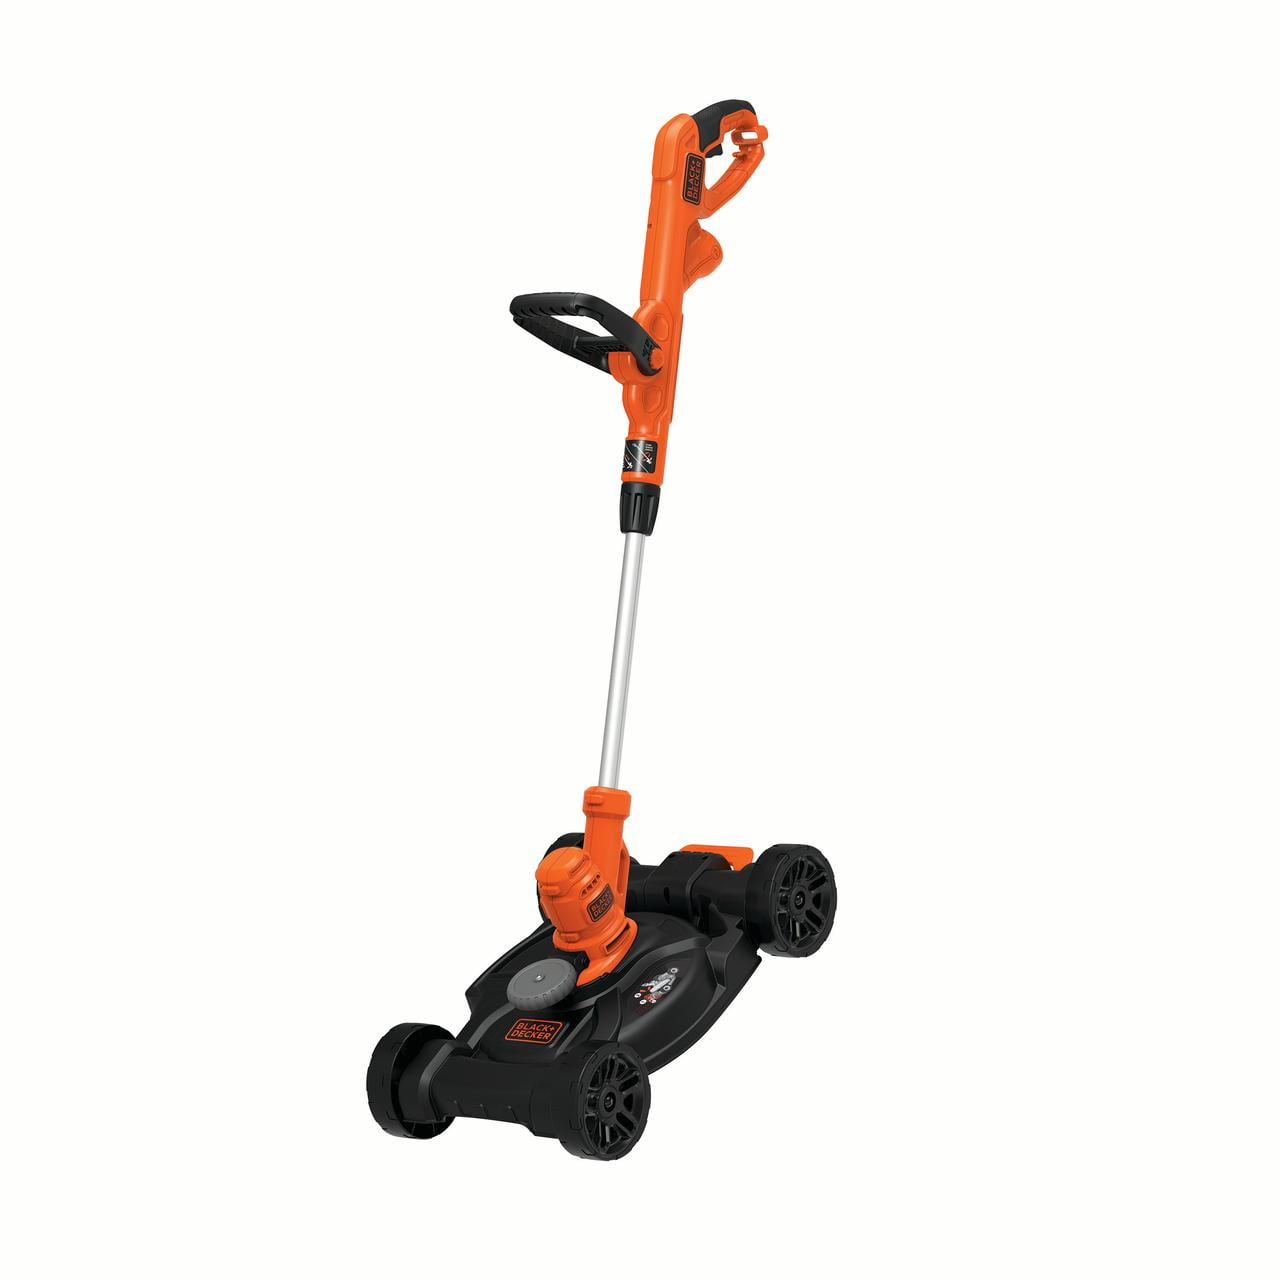 Black and Decker 20-volt Max 12-in 3-in-1 Compact Cordless Push Lawn Mower